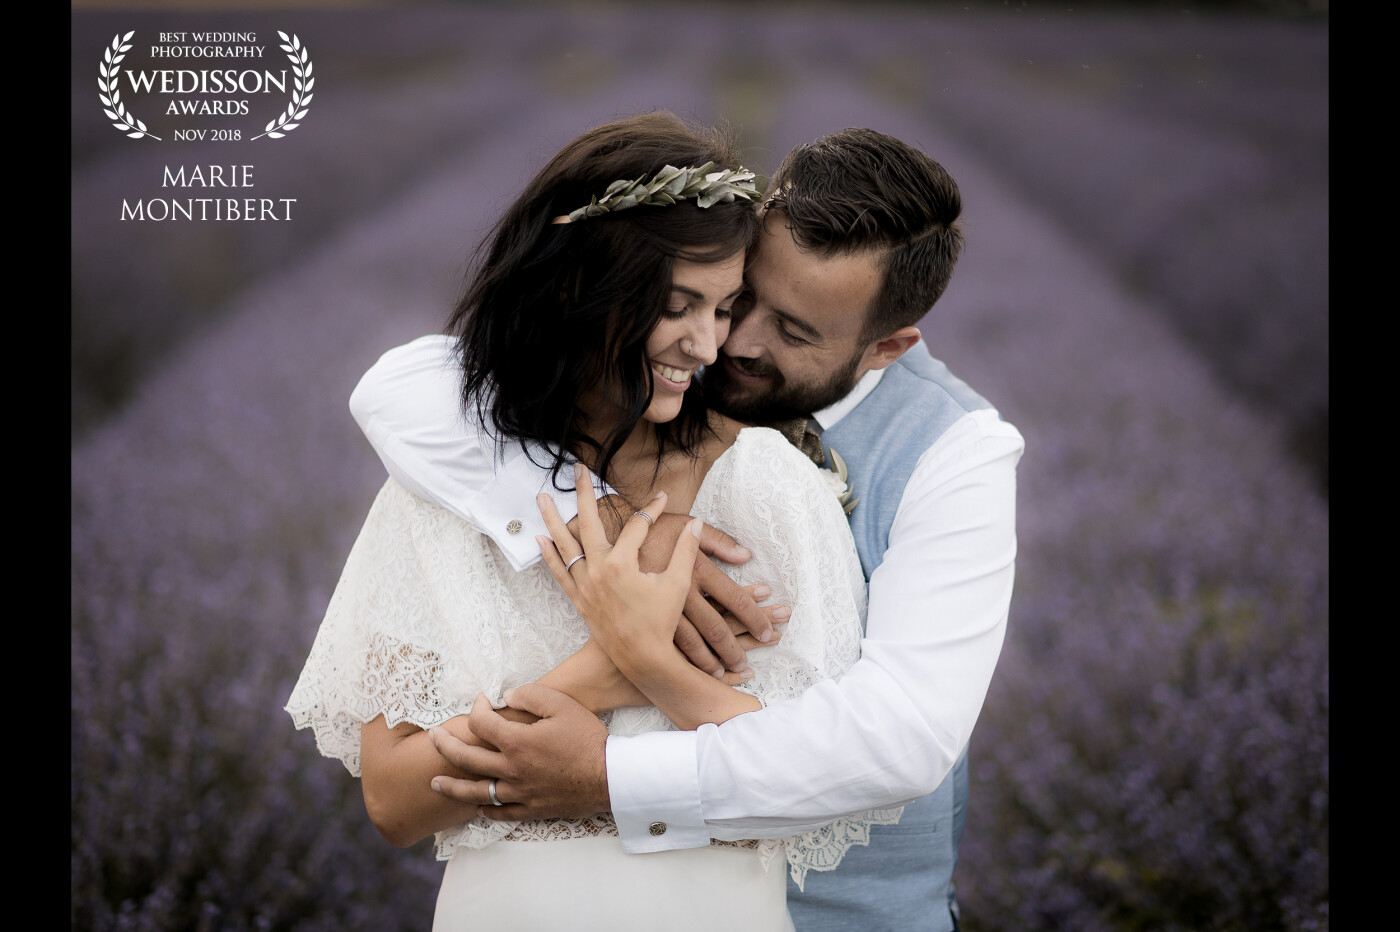 Severine & Gregory knew each other for years. After difficulties they got divorced, then children and true love have united them once again. Lavender fields of the south of France welcome us for a short and beautiful moment.